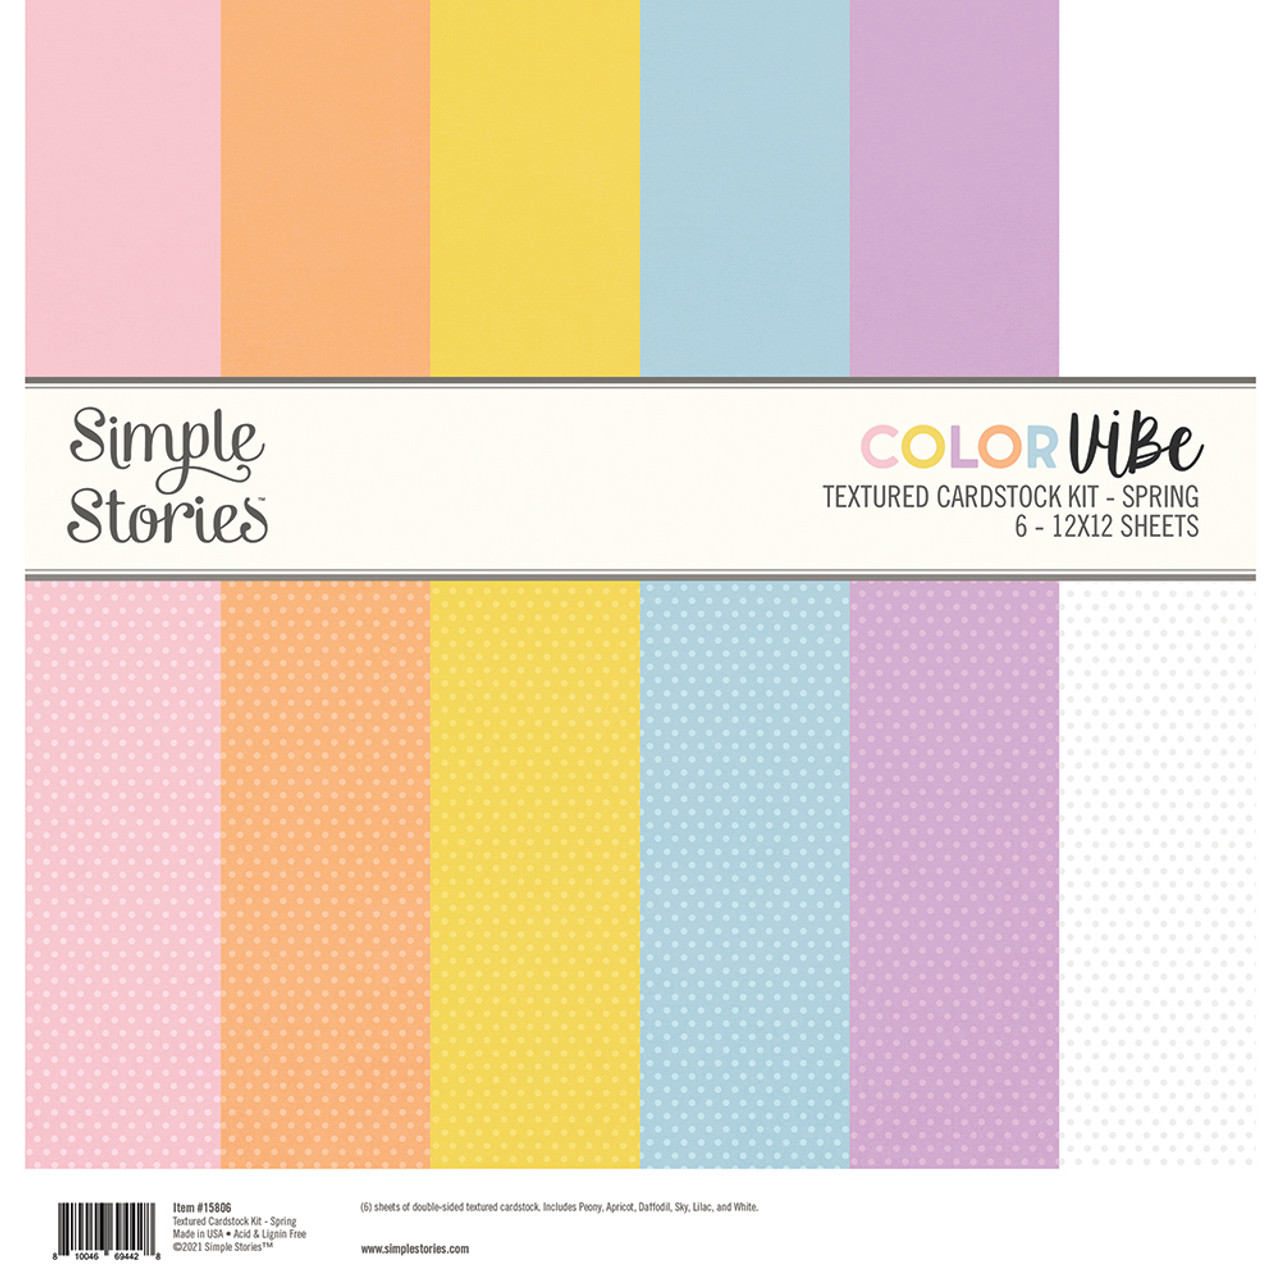 SIMPLE STORIES Color Vibe 12x12 Textured Cardstock Kit: Spring - Scrapbook  Generation